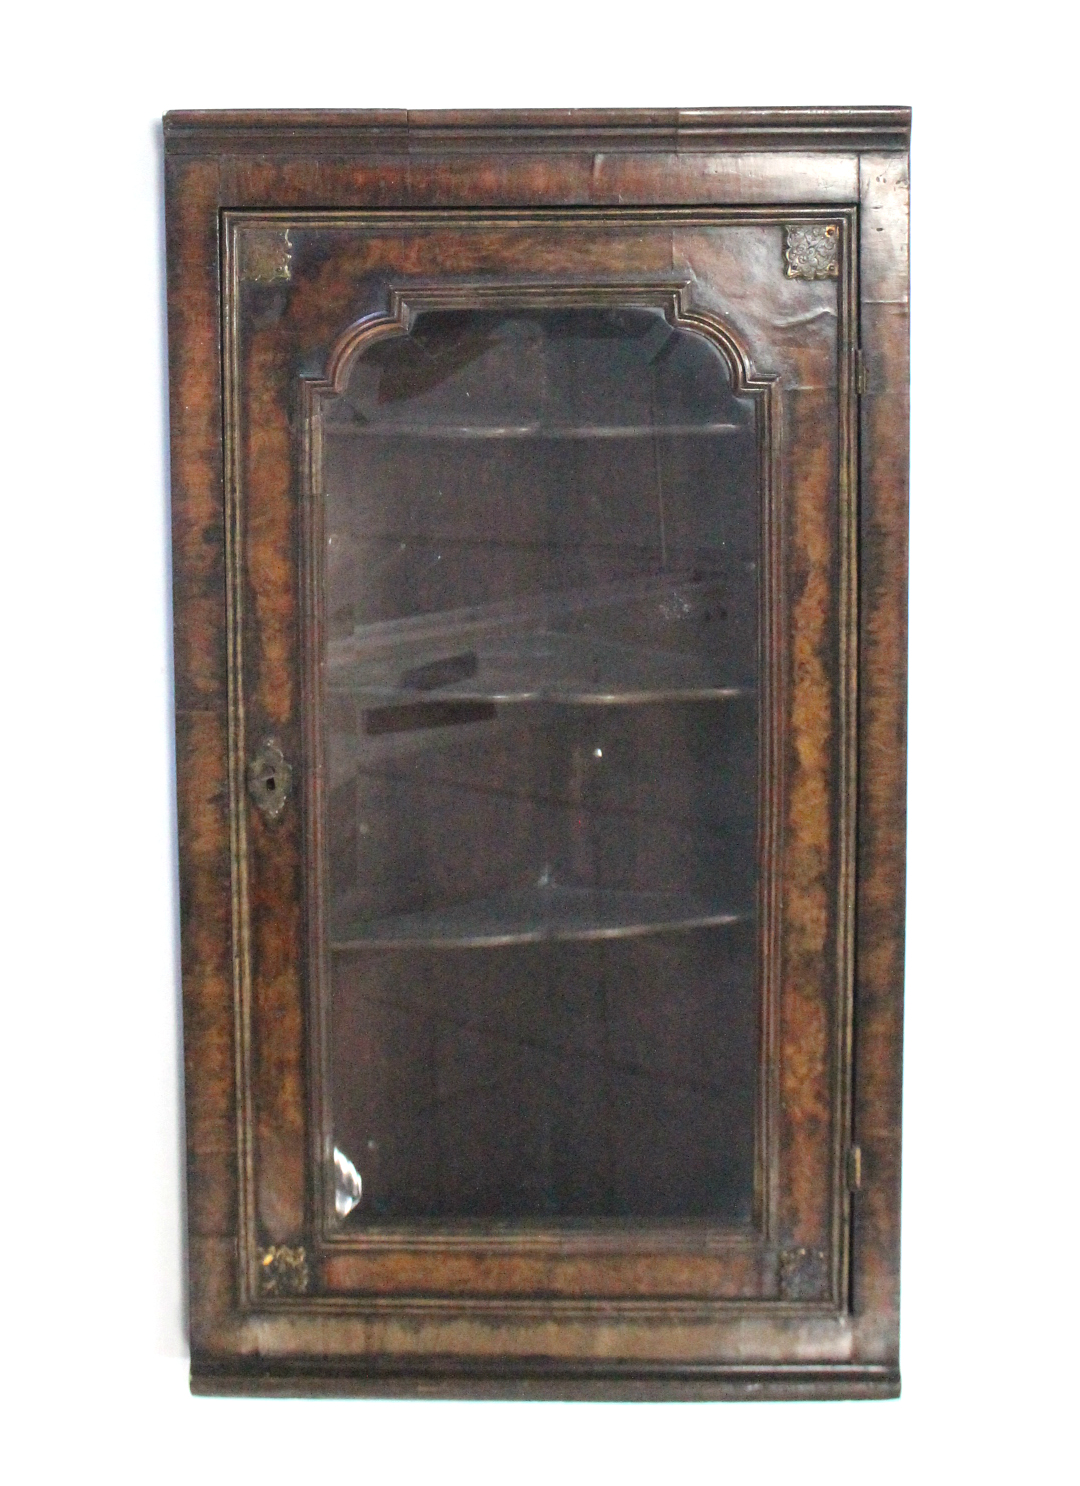 A 19th century burr-walnut hanging corner cabinet in the William & Mary style, fitted three shaped